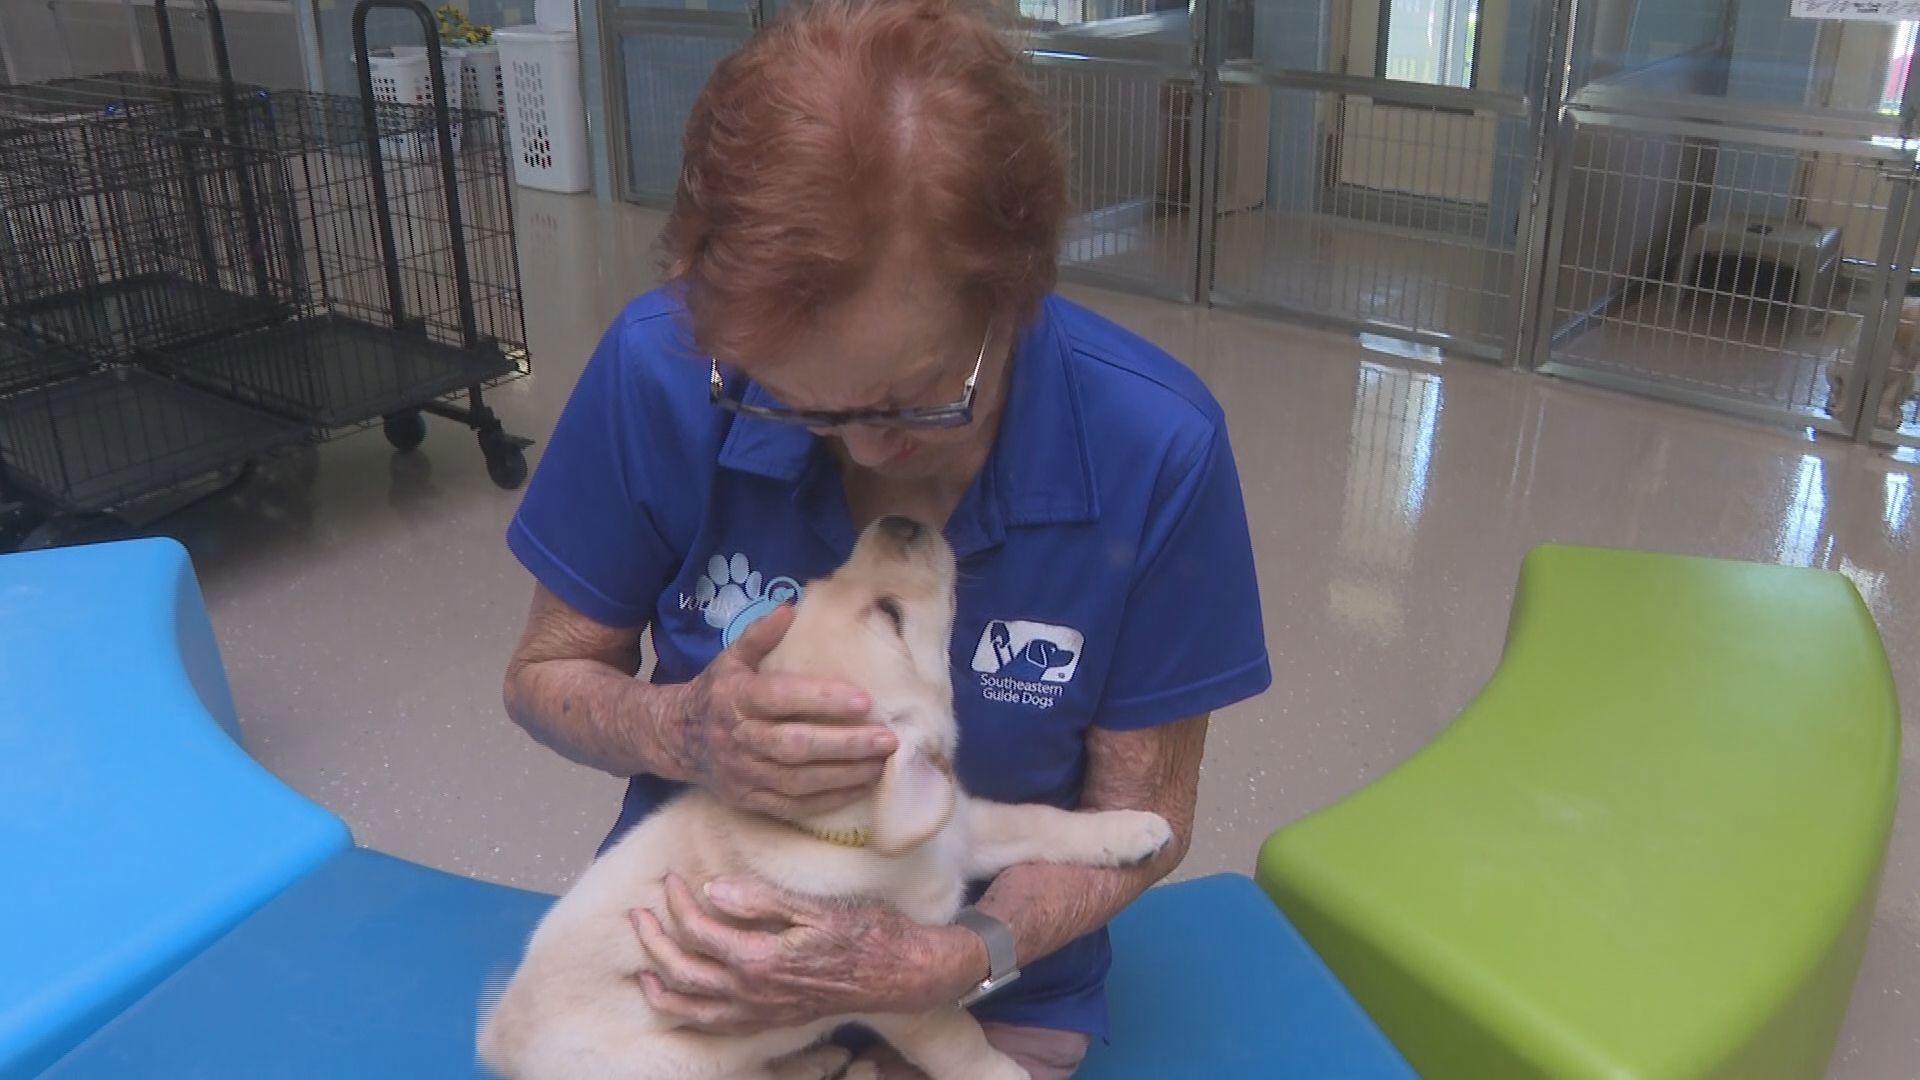 The dedicated volunteer gives more than 10,000 hours of her time to Dogs Inc.